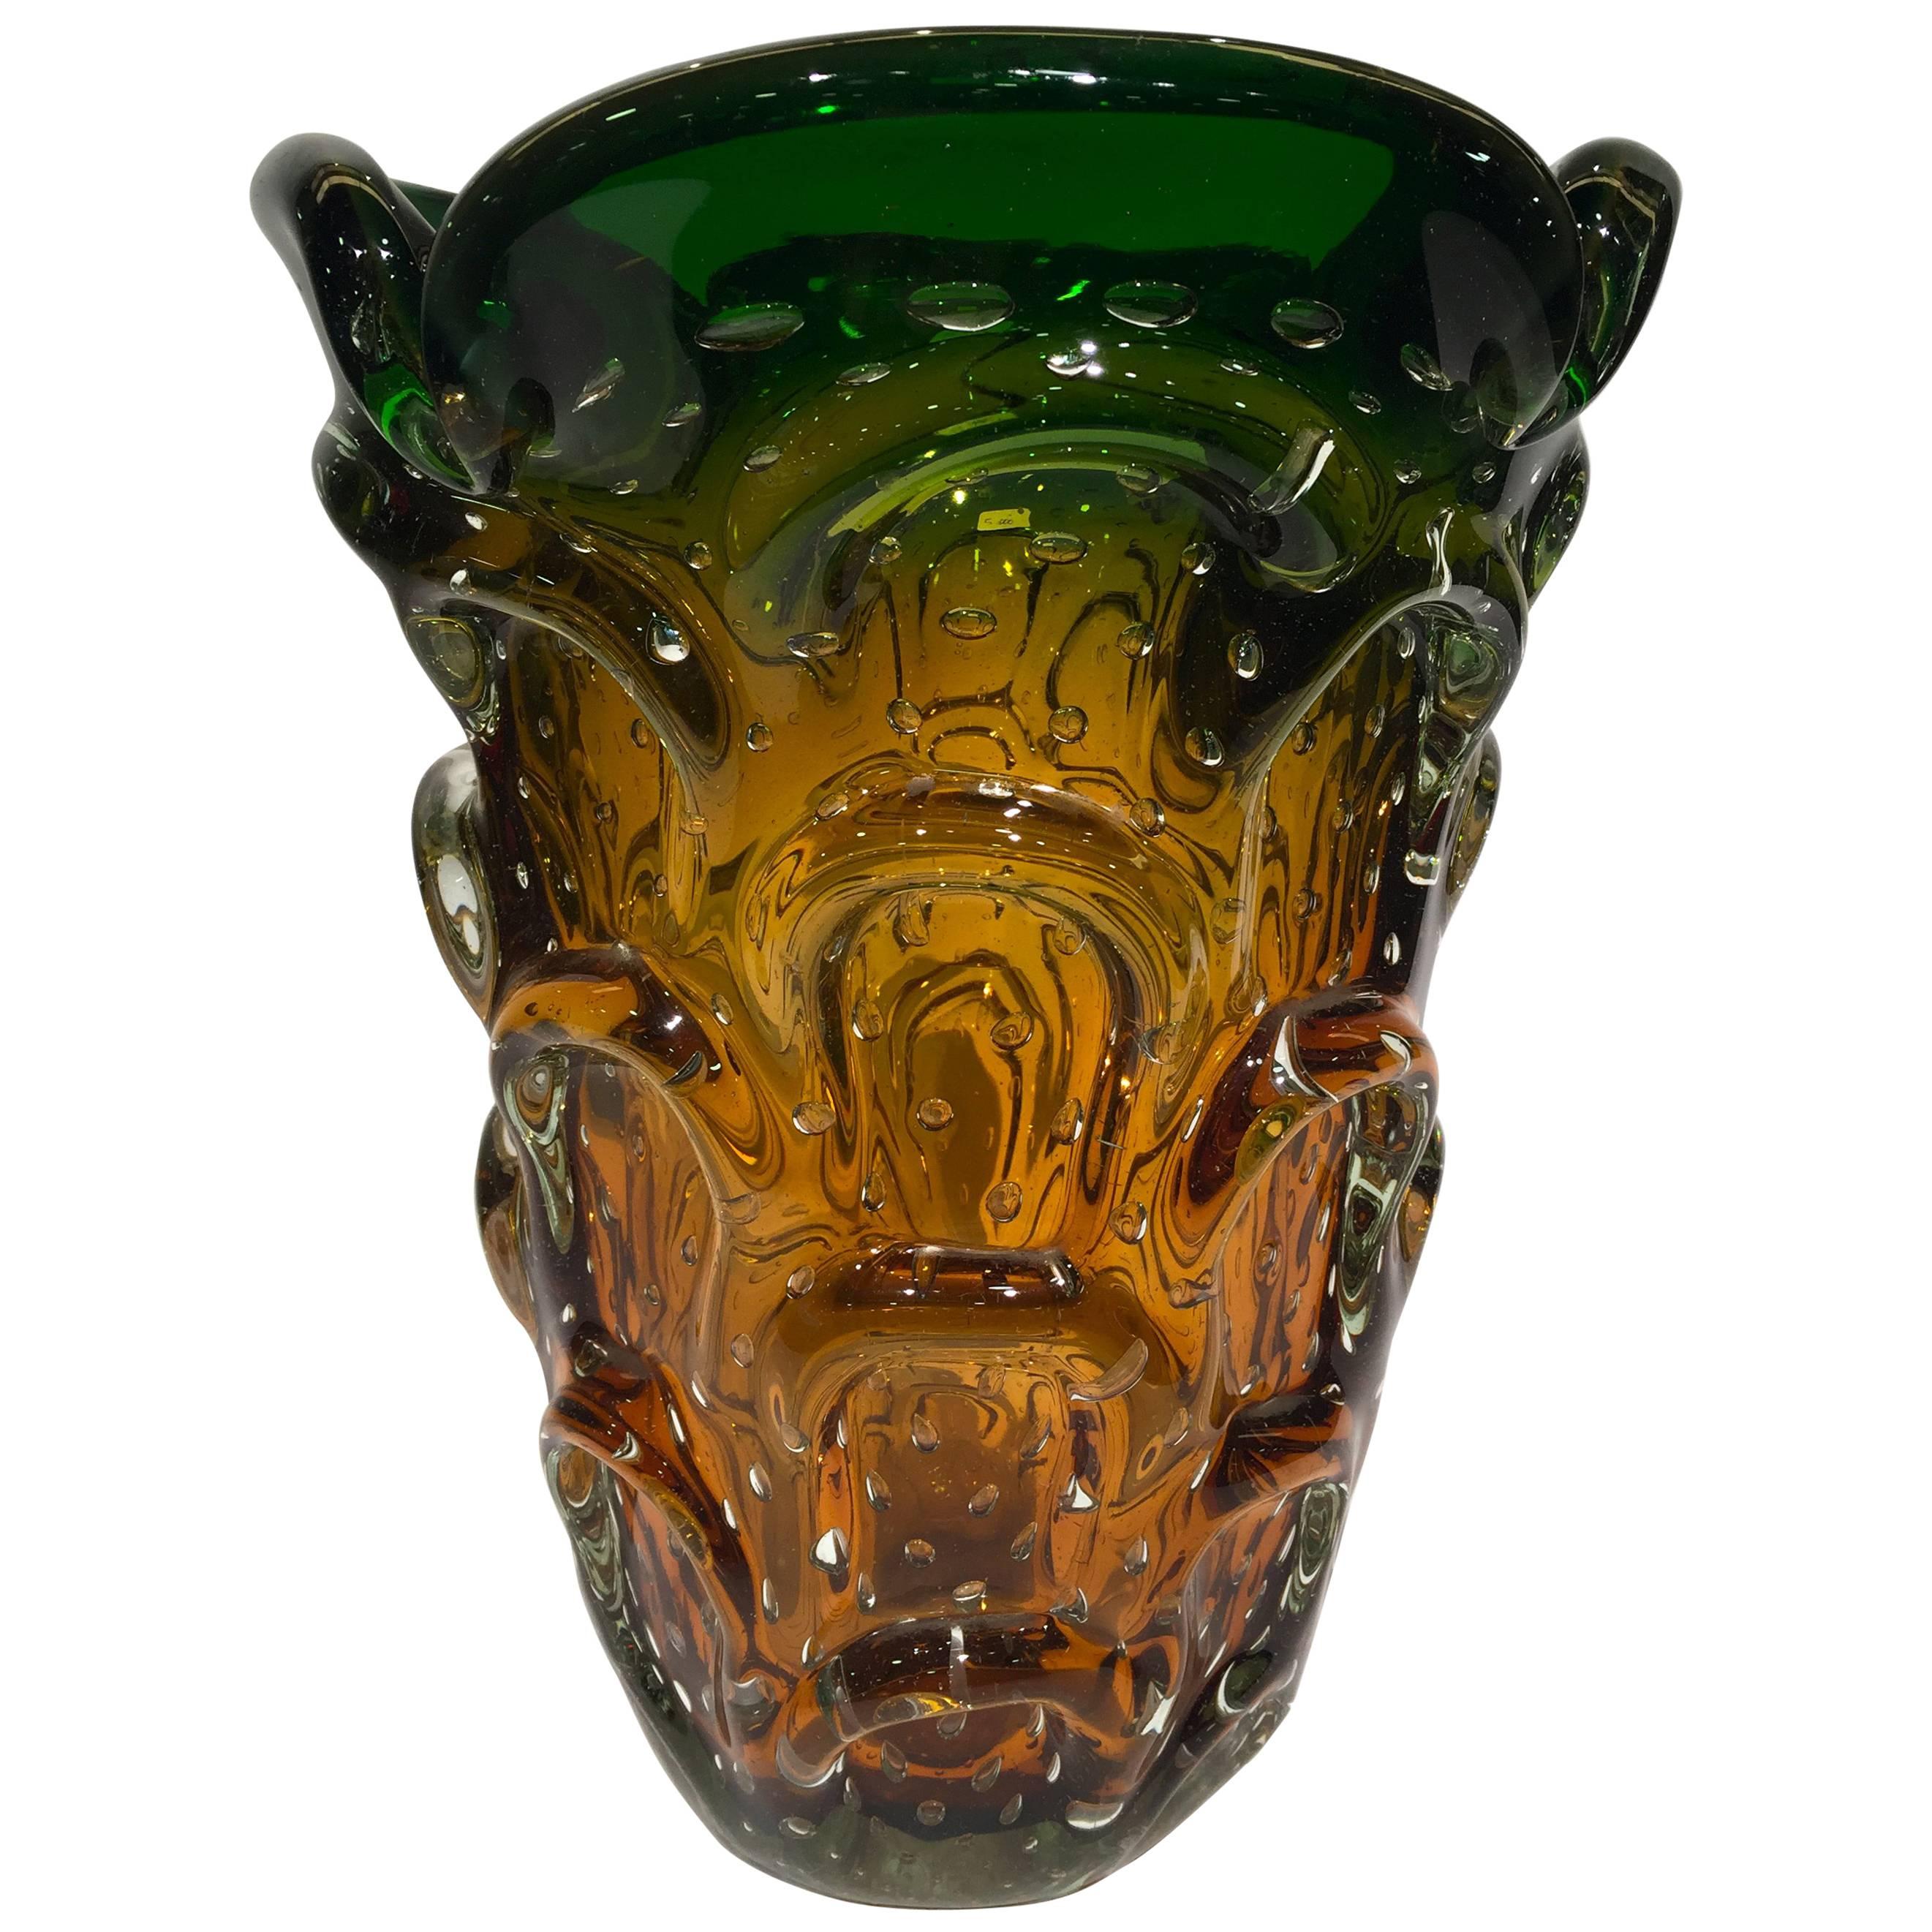 Murano Artistic Blown Glass "Cactus" Vase Green and Amber, circa 1950 For Sale